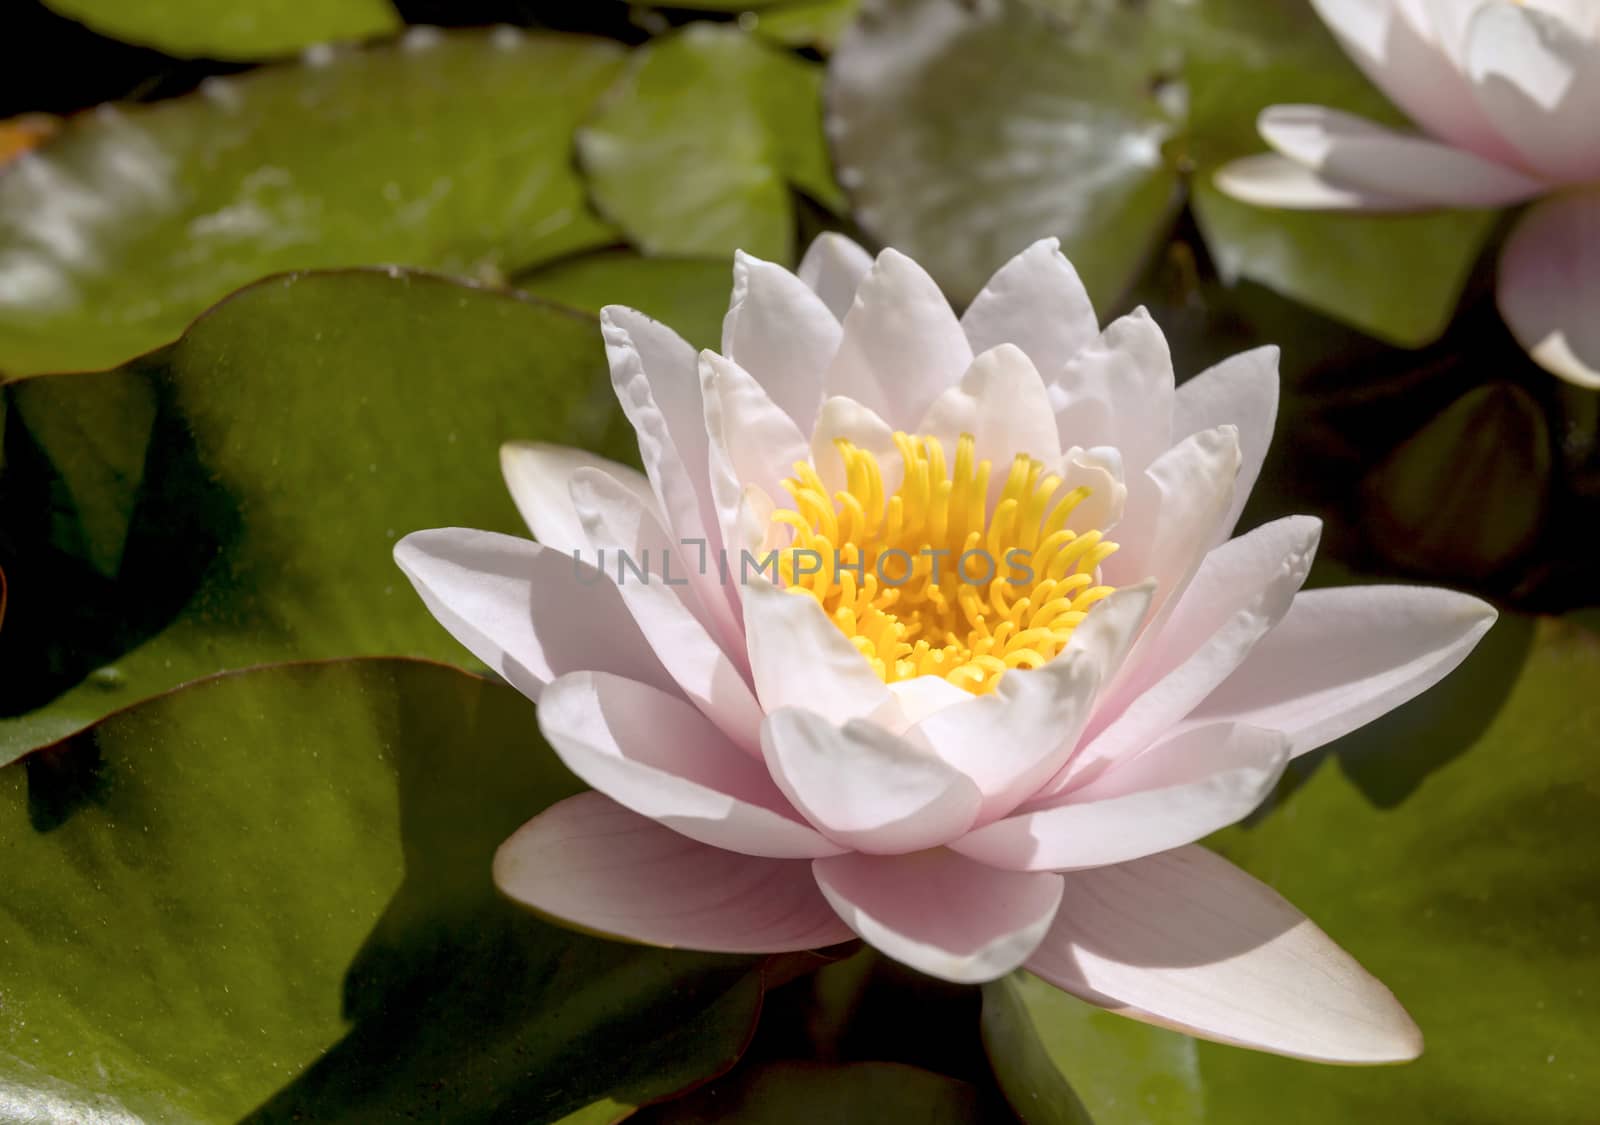 This photo was taken at a formal botanical garden near San Francisco, California. Spring had arrived, and flowers are in bloom. This image features a lily pond, and beautiful blooming Lotus flower.